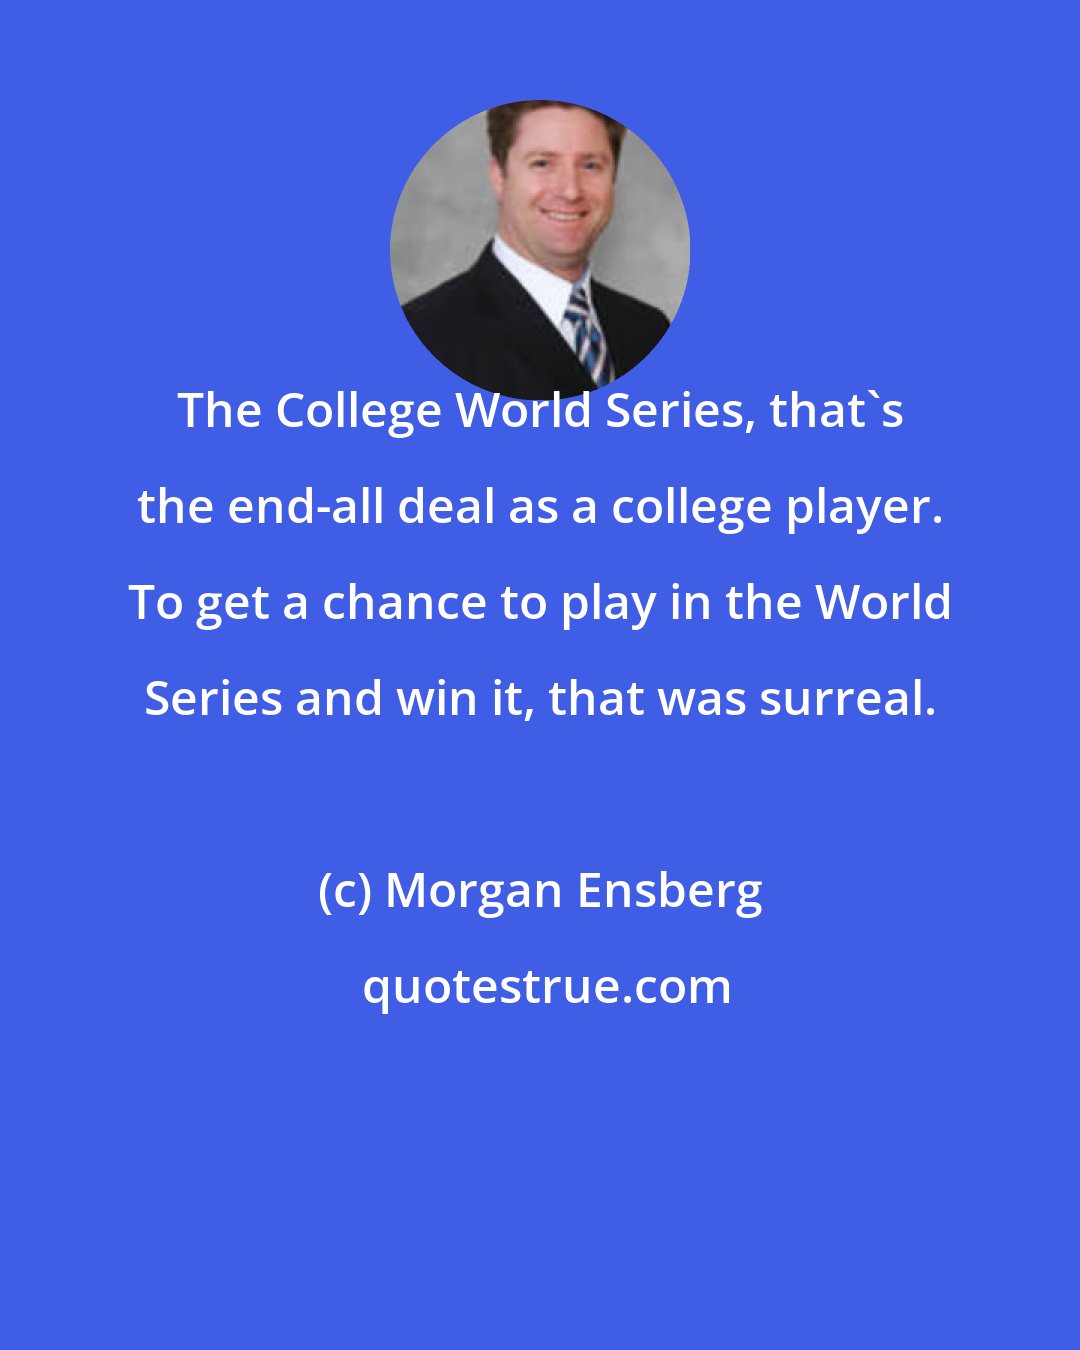 Morgan Ensberg: The College World Series, that's the end-all deal as a college player. To get a chance to play in the World Series and win it, that was surreal.